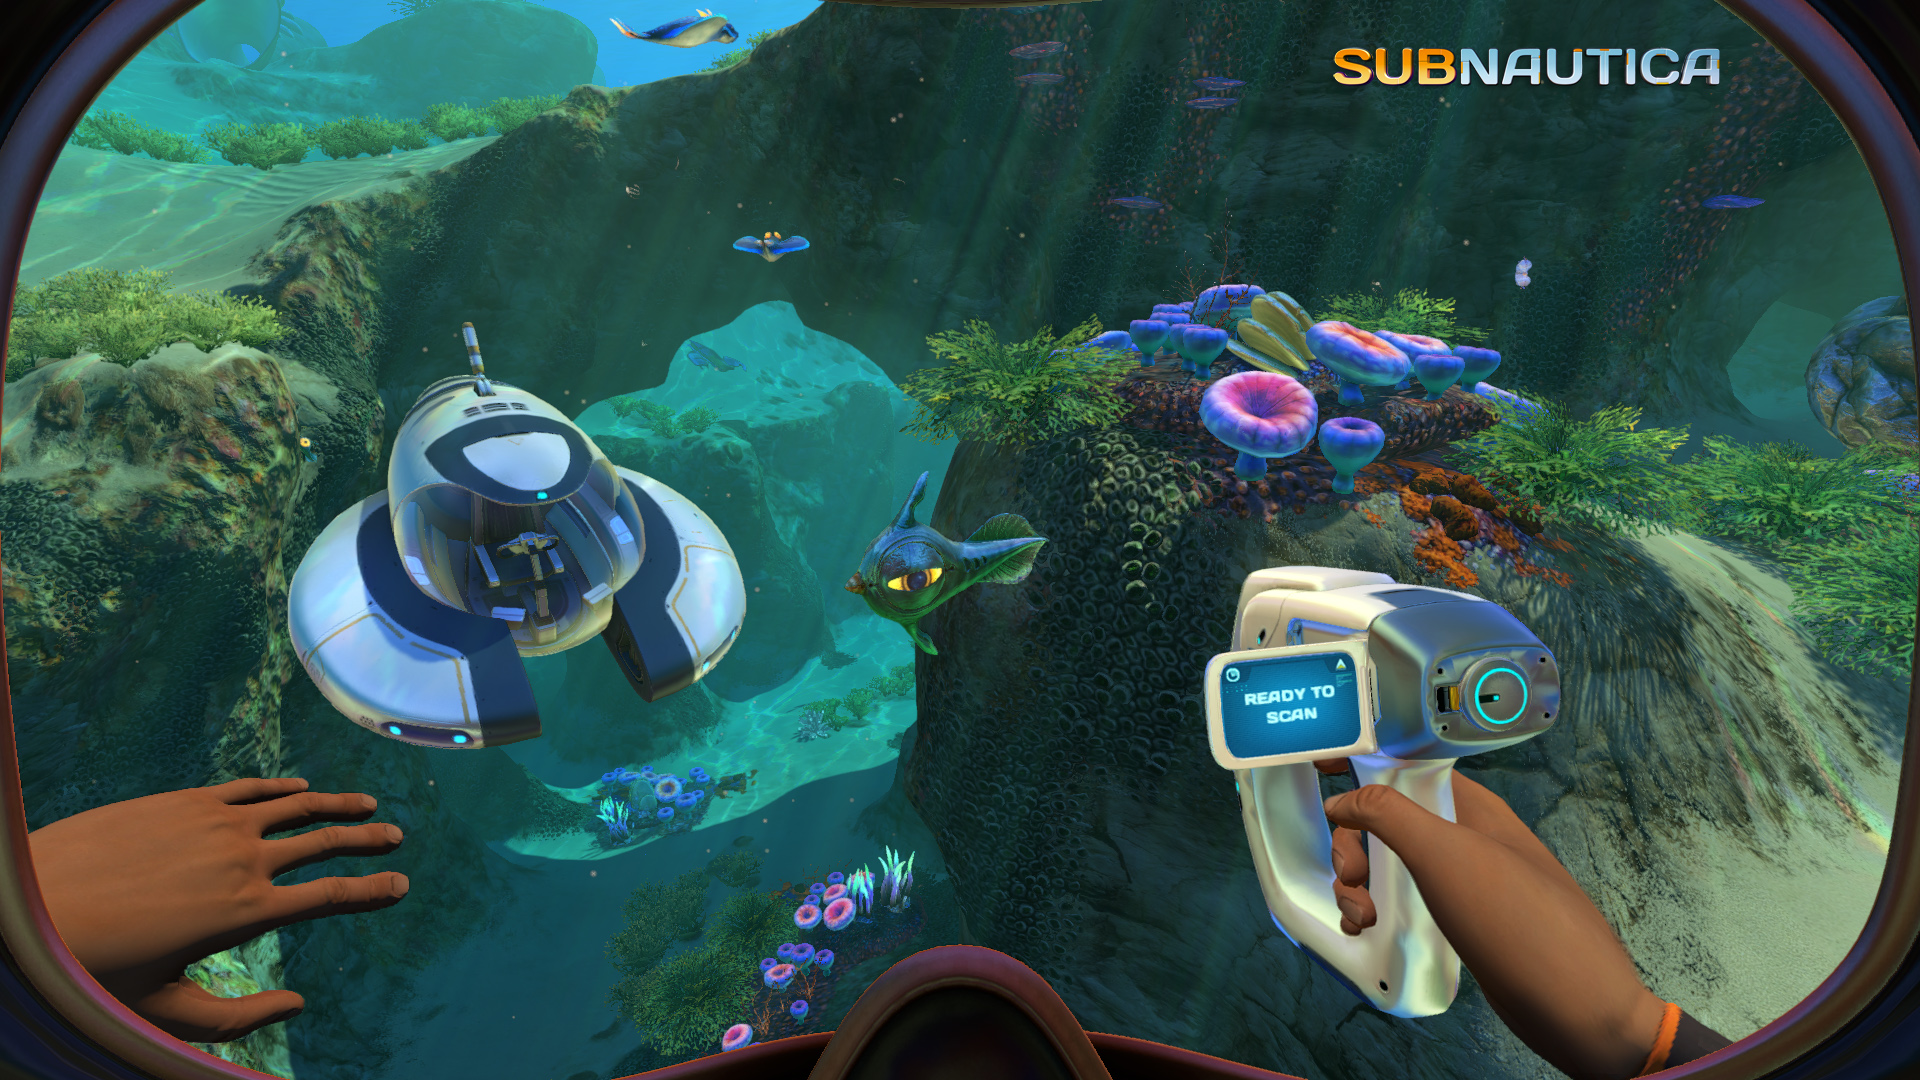 The Wildlife in Sunautica is diverse. Tameable sea life and terrifying cannibal sea creatures ready to attack at any moment. This image is there to show you a glimpse of Subnautica's eco-system.